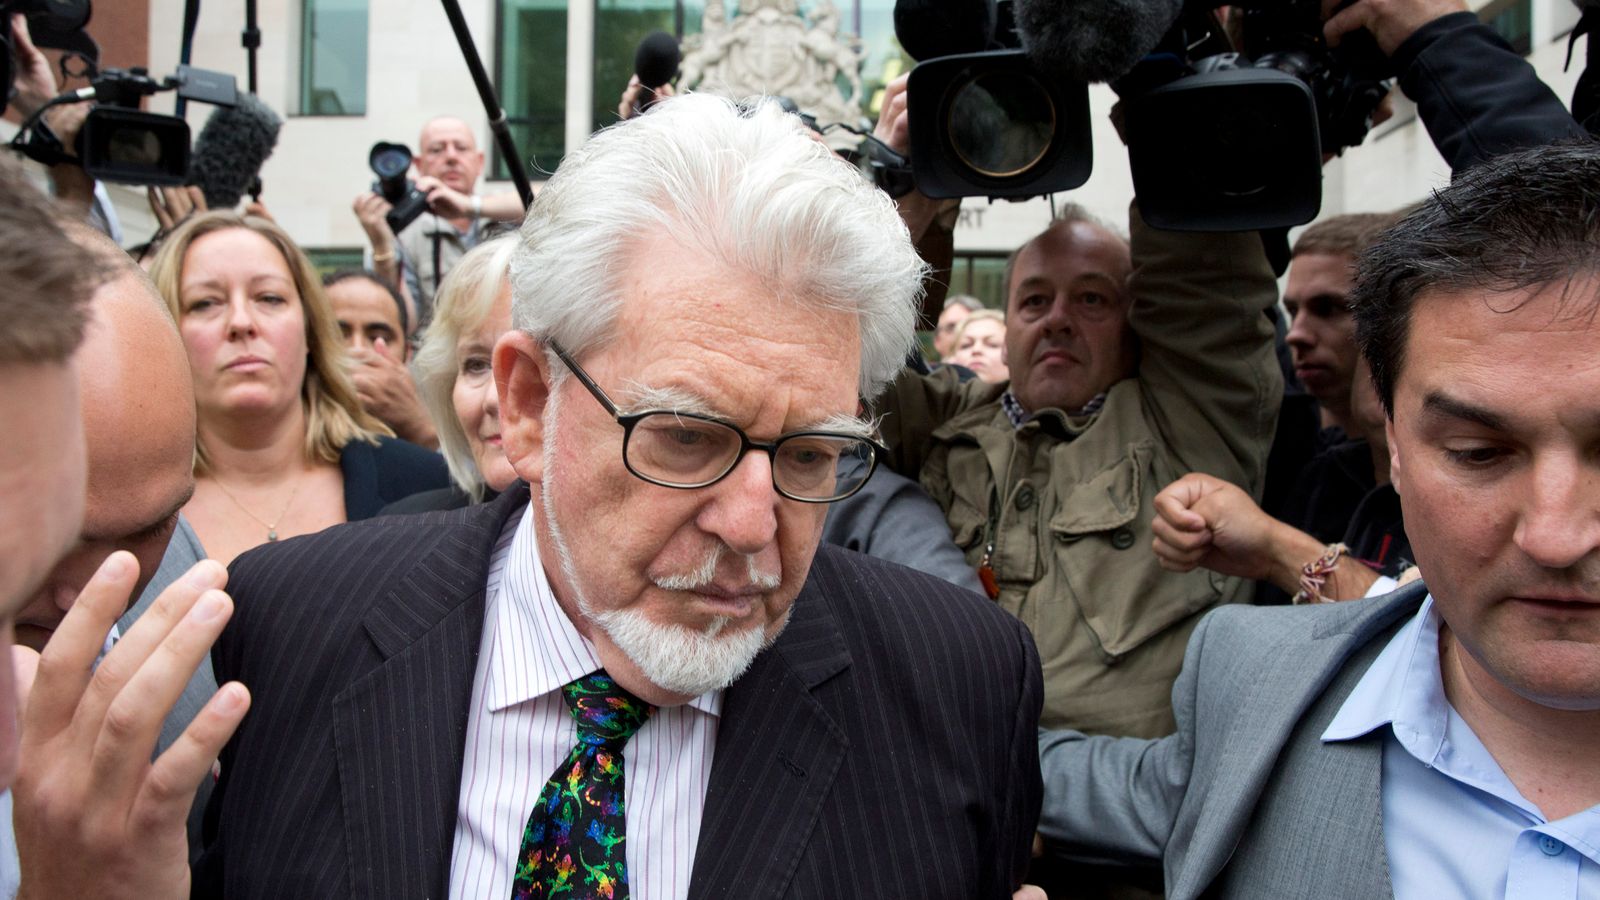 Rolf Harris: Convicted paedophile who used his fame to groom young girls dies aged 93